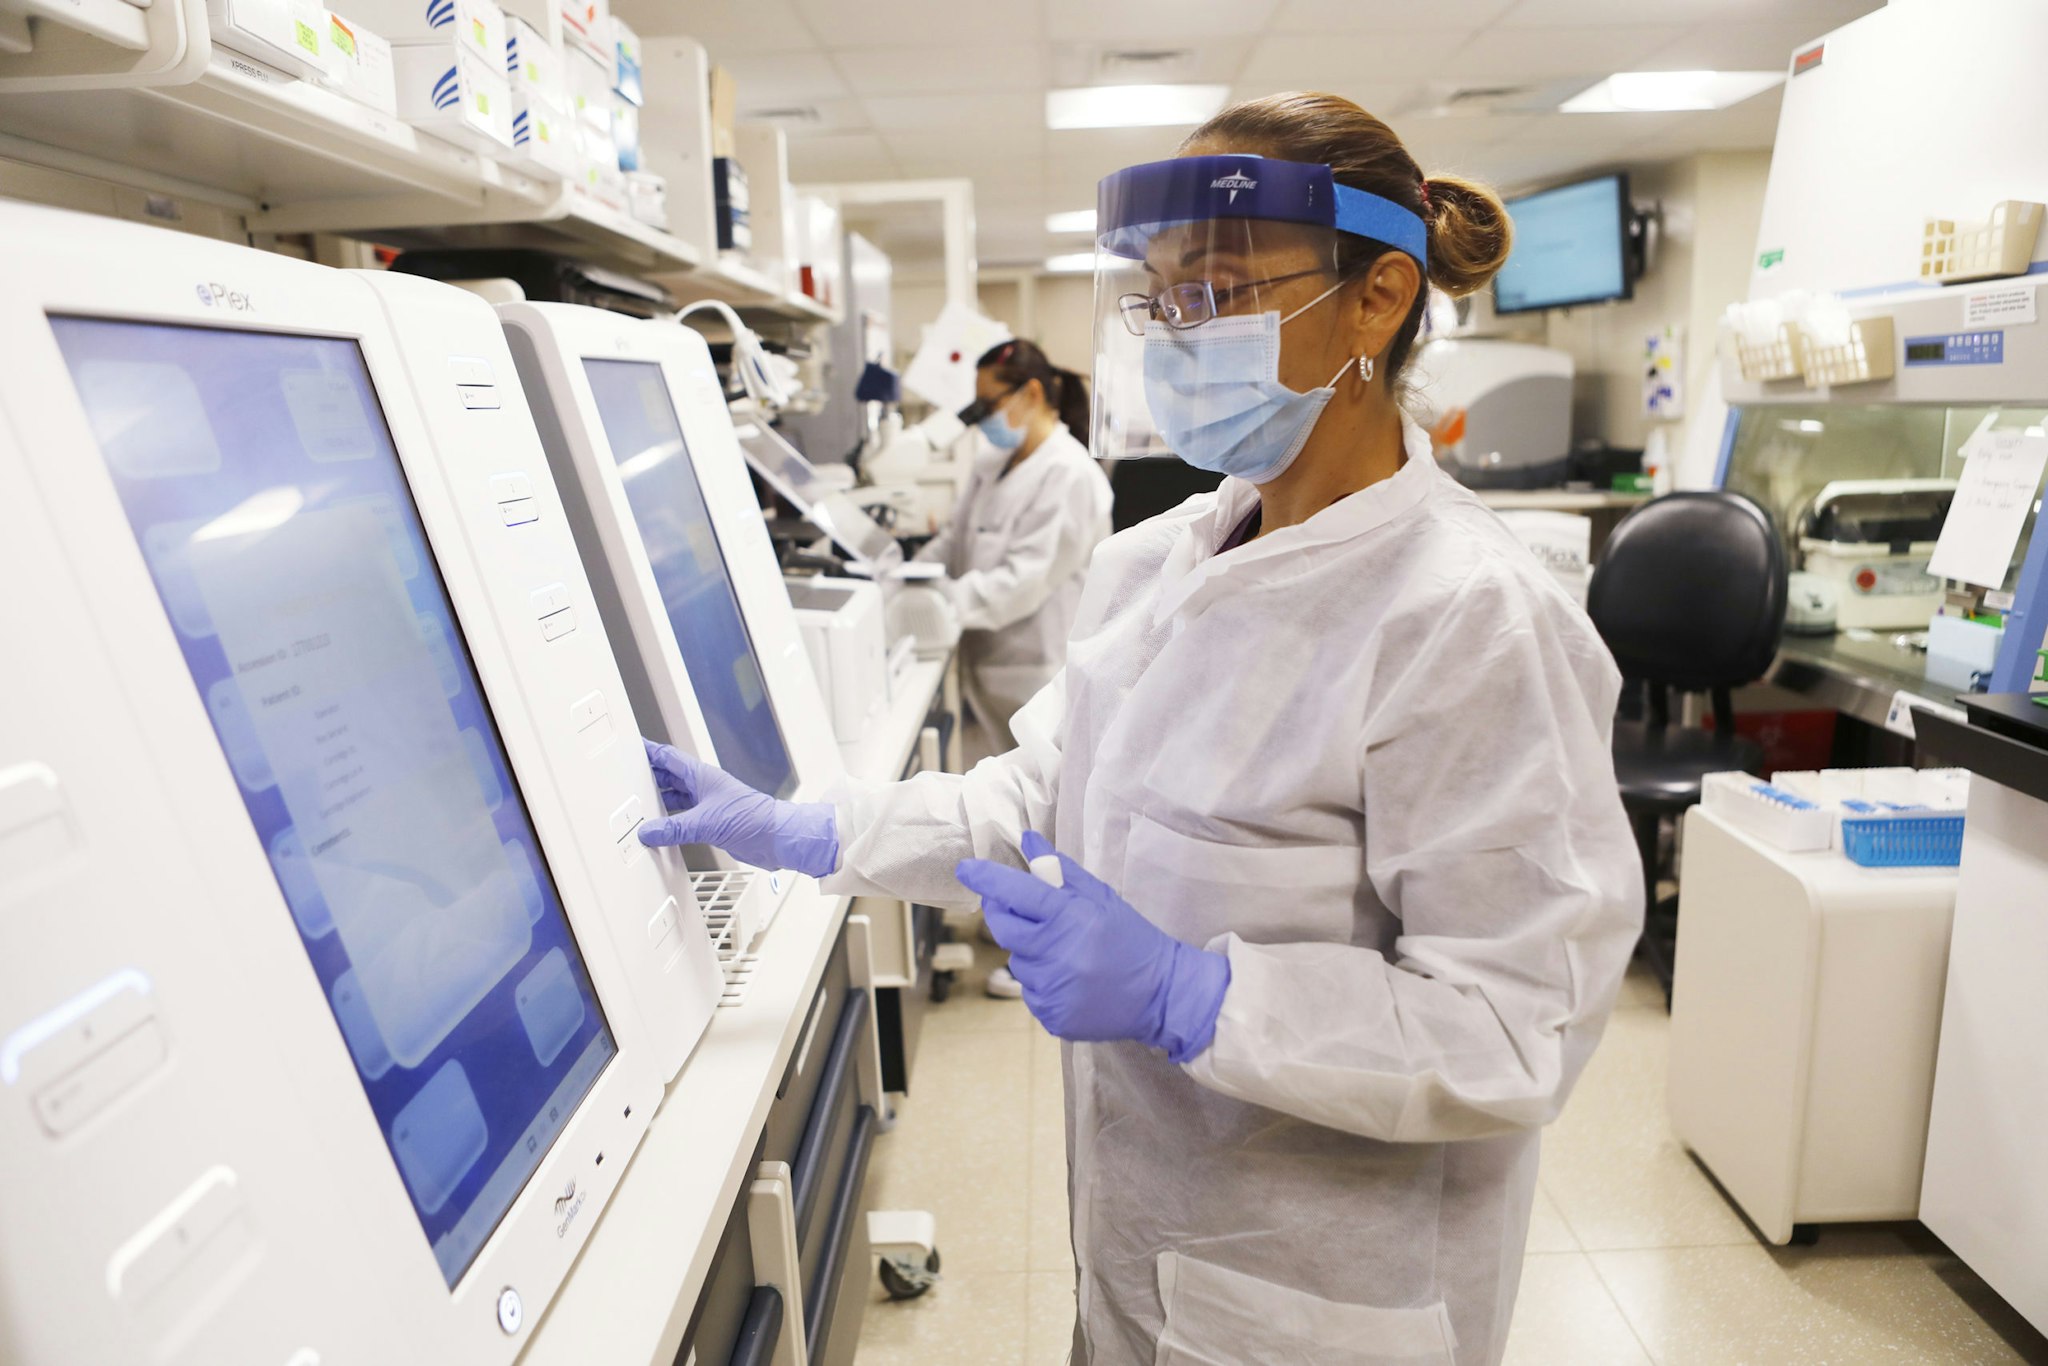 TAMPA, FL - JUNE 25: Adriana Cardenas, a medical technologist processes test samples for the coronavirus at the AdventHealth Tampa labs on June 25, 2020 in Tampa, Florida. Florida is currently experiencing a surge in COVID-19 cases, as the state reached a new record for single-day infections on Wednesday with 5,511 new cases. (Photo by Octavio Jones/Getty Images)